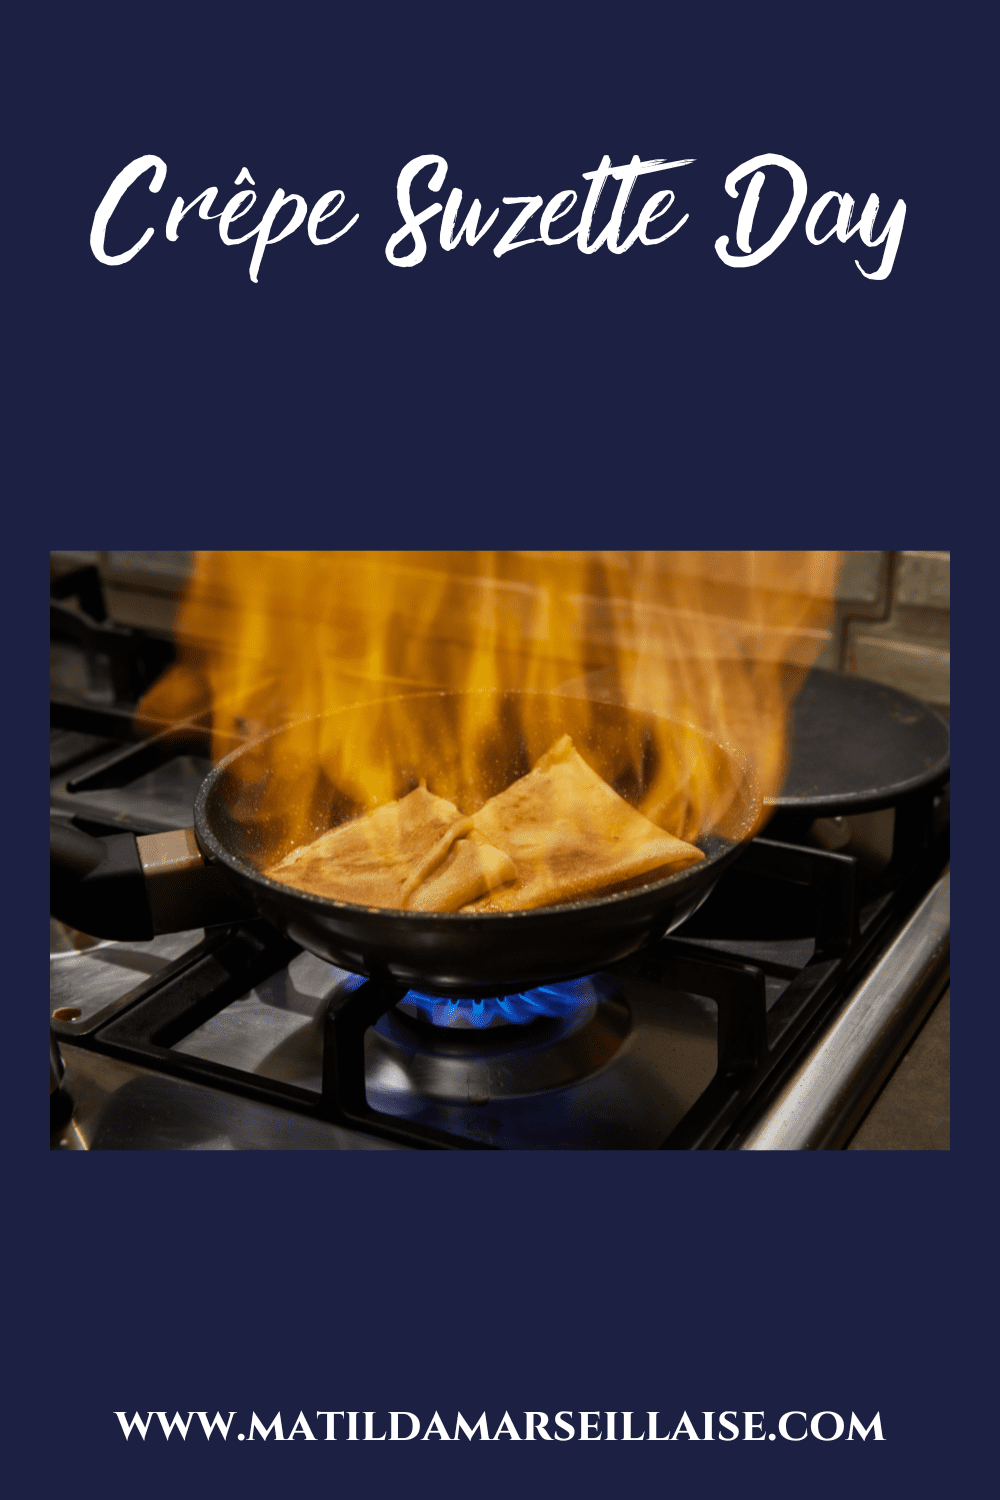 It’s Crêpe Suzette Day: discover the history of the dish and recommended French wine pairings